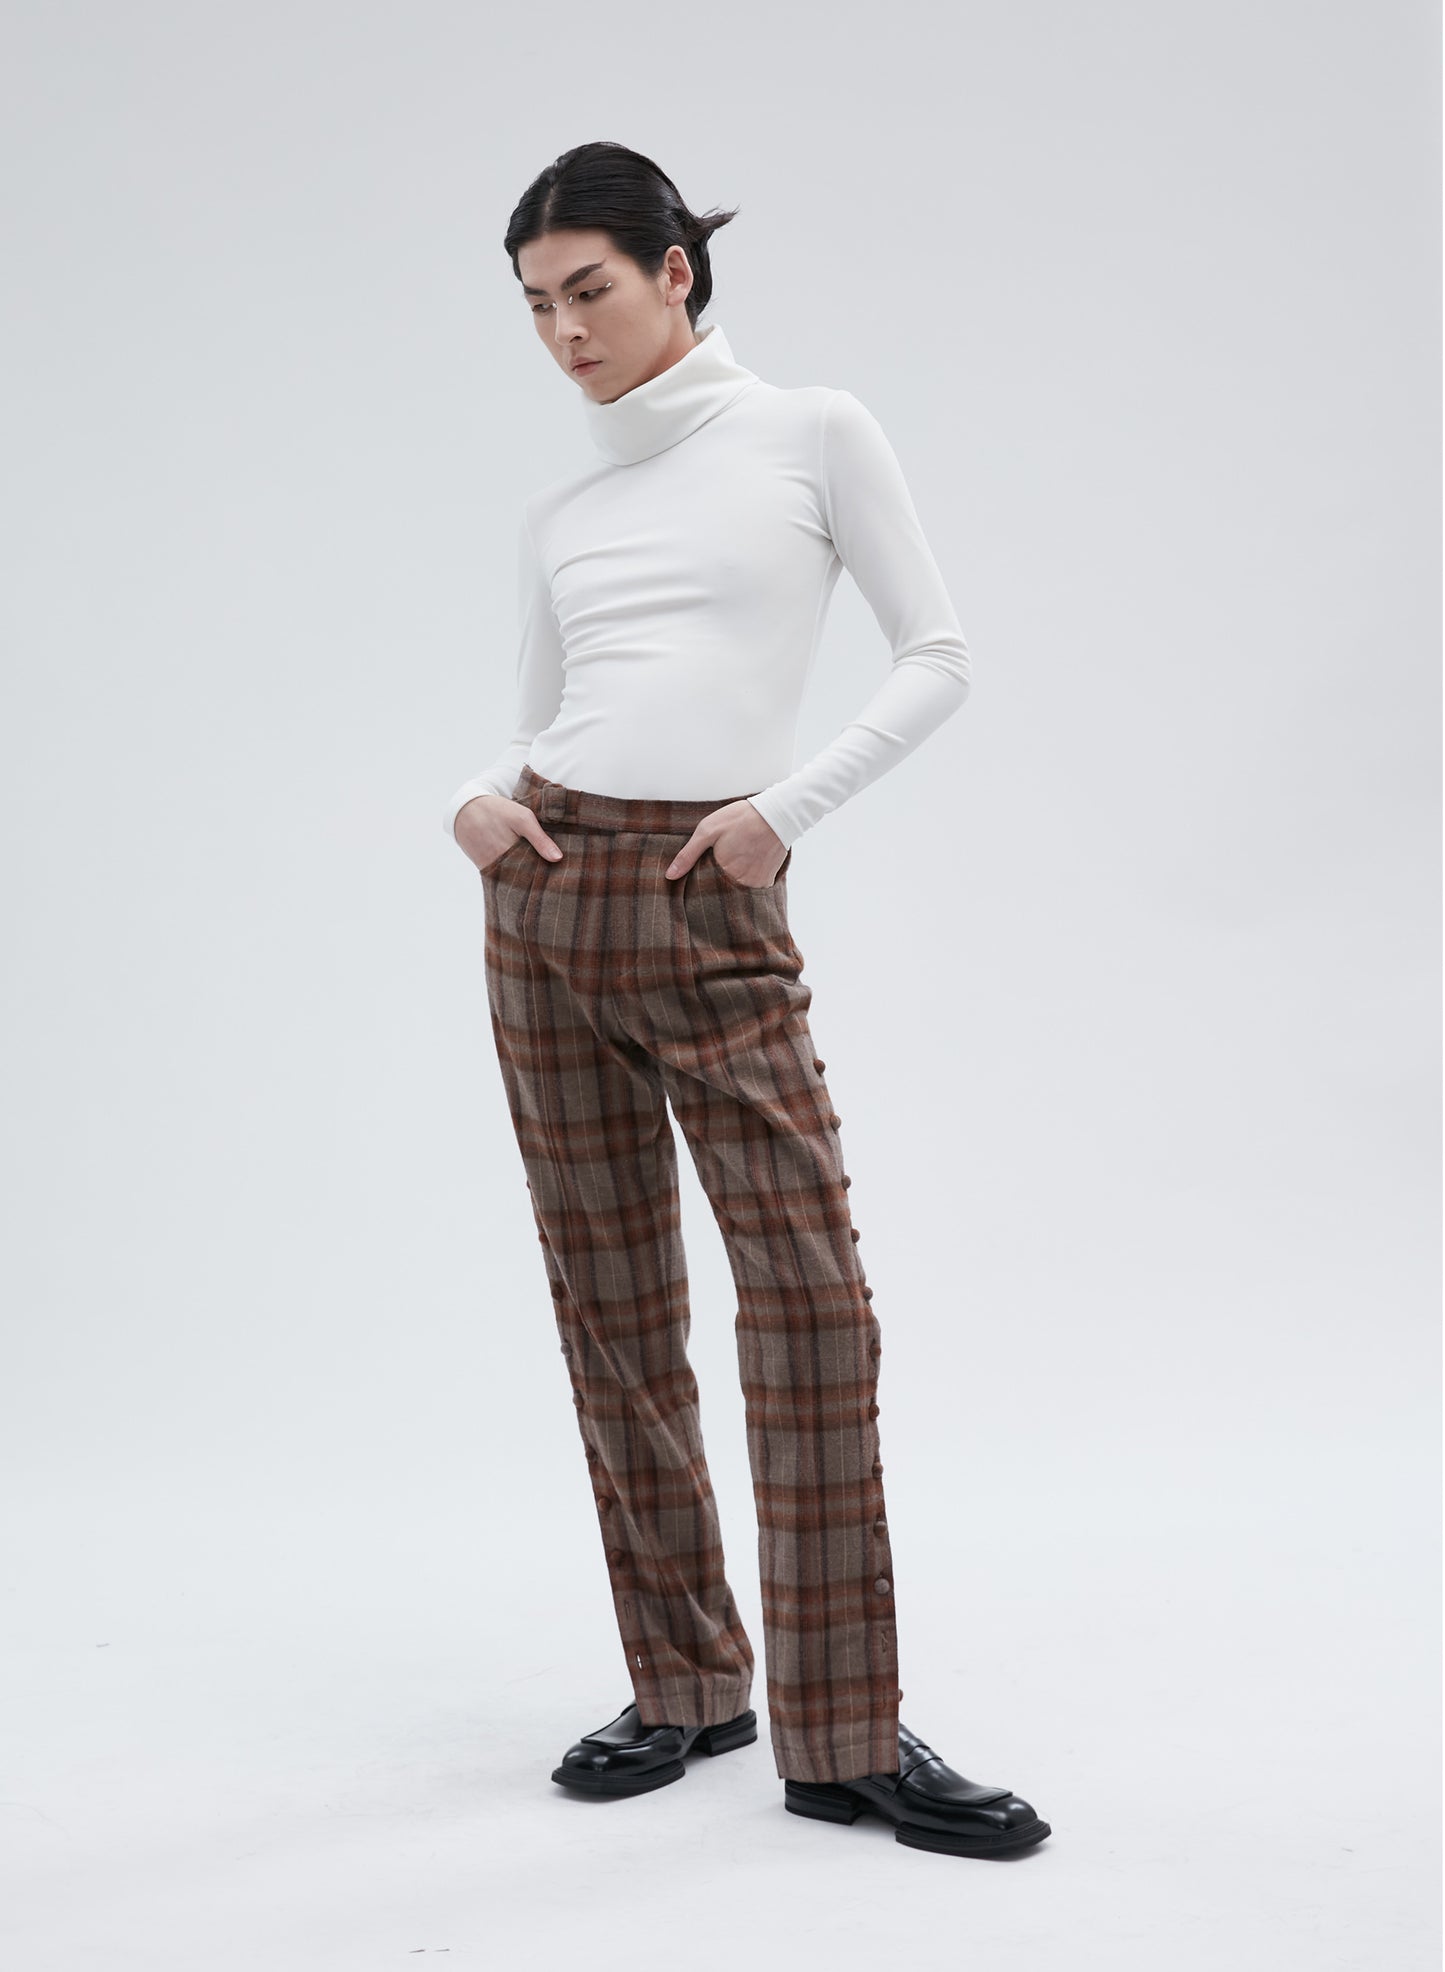 Timber Trouser